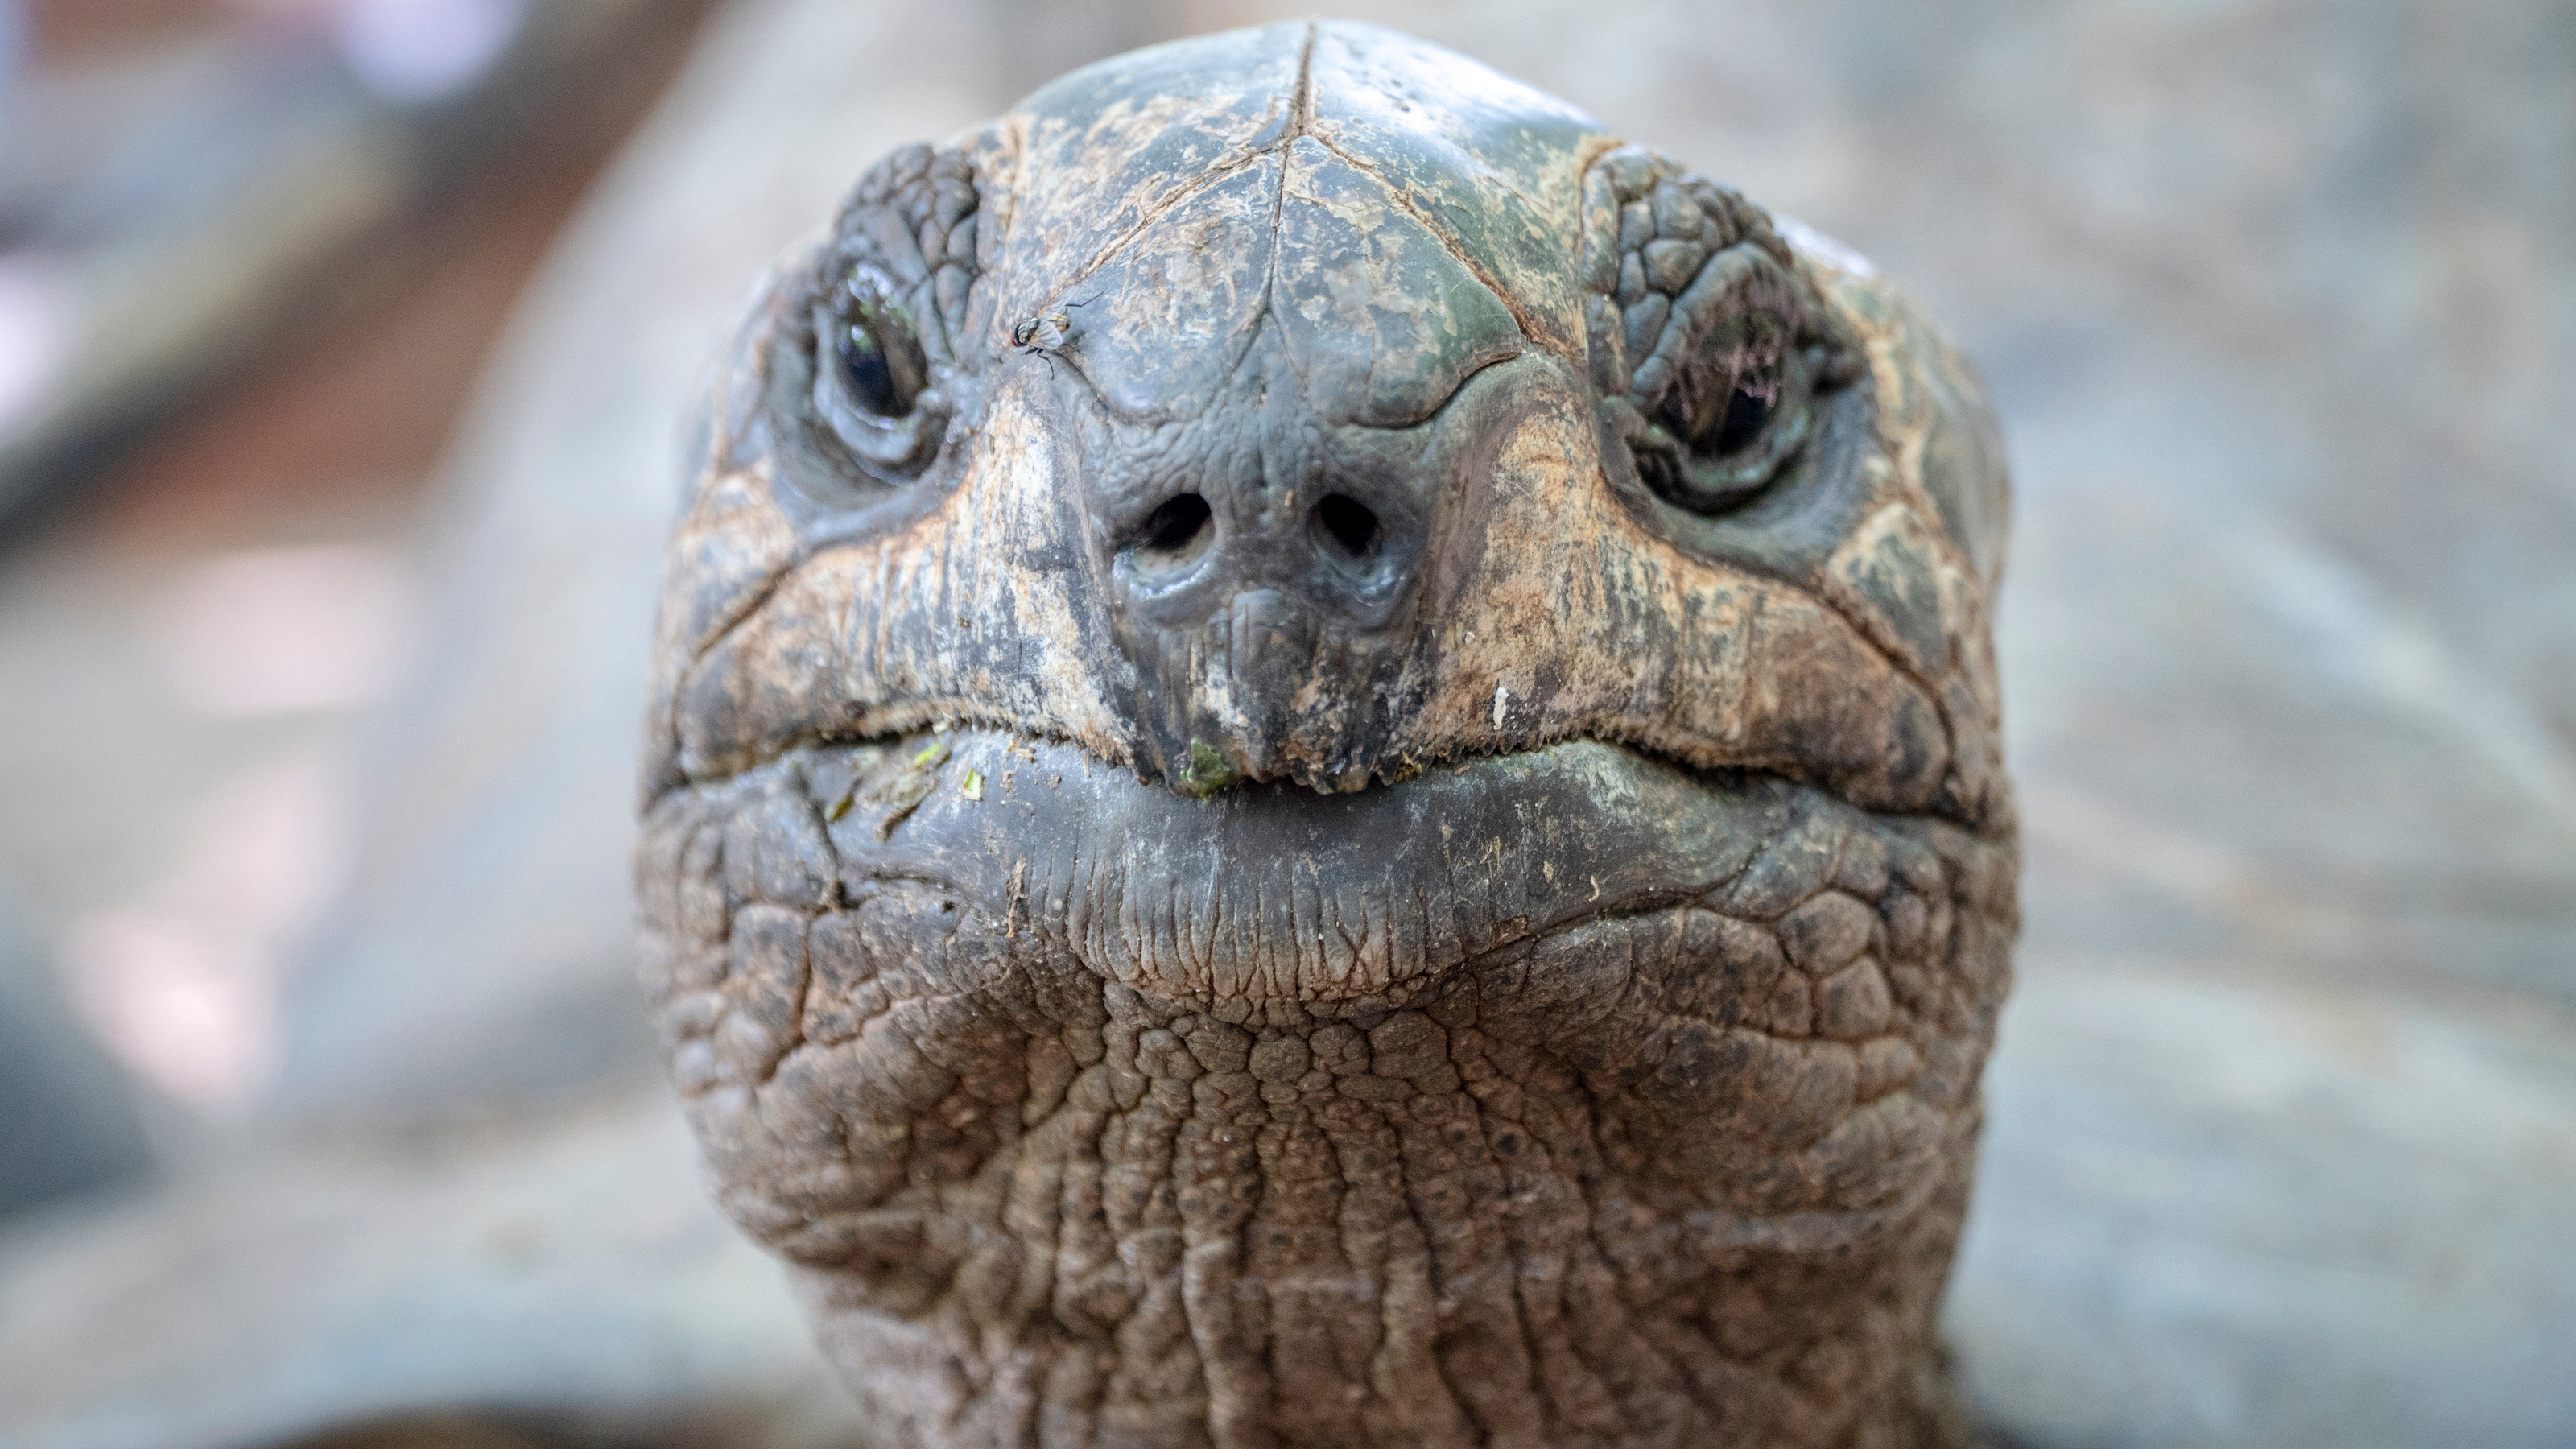 Why do tortoises live so long? It's the shell - Big Think